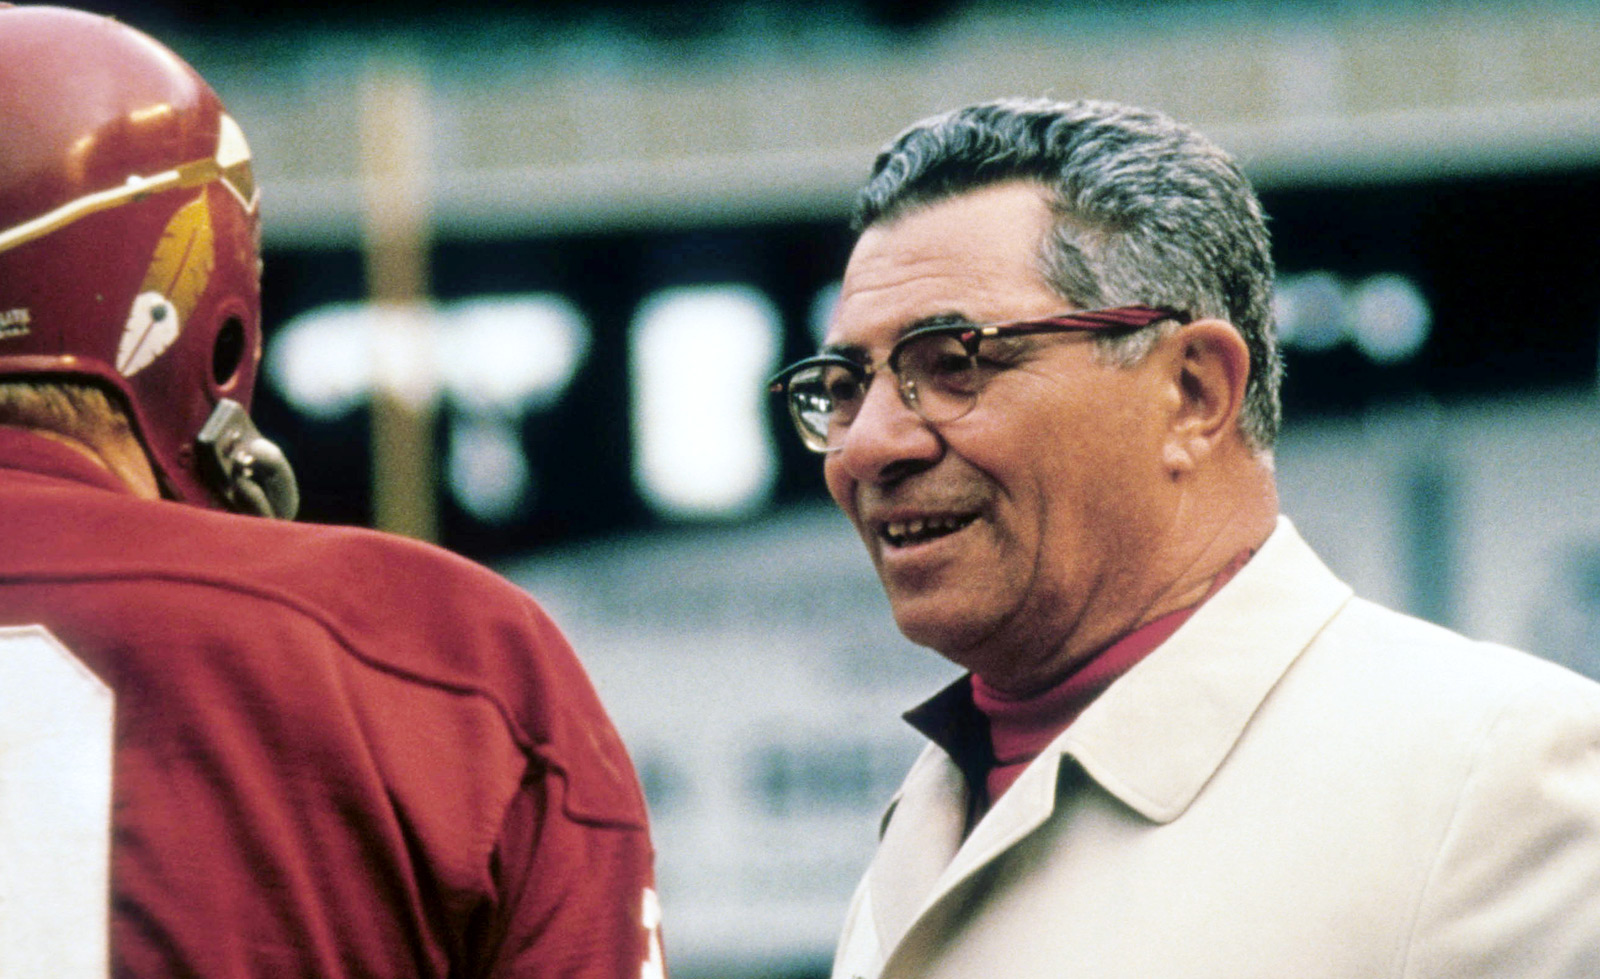 In 1969, his only season in Washington, Lombardi led the Redskins to a 7-5-...